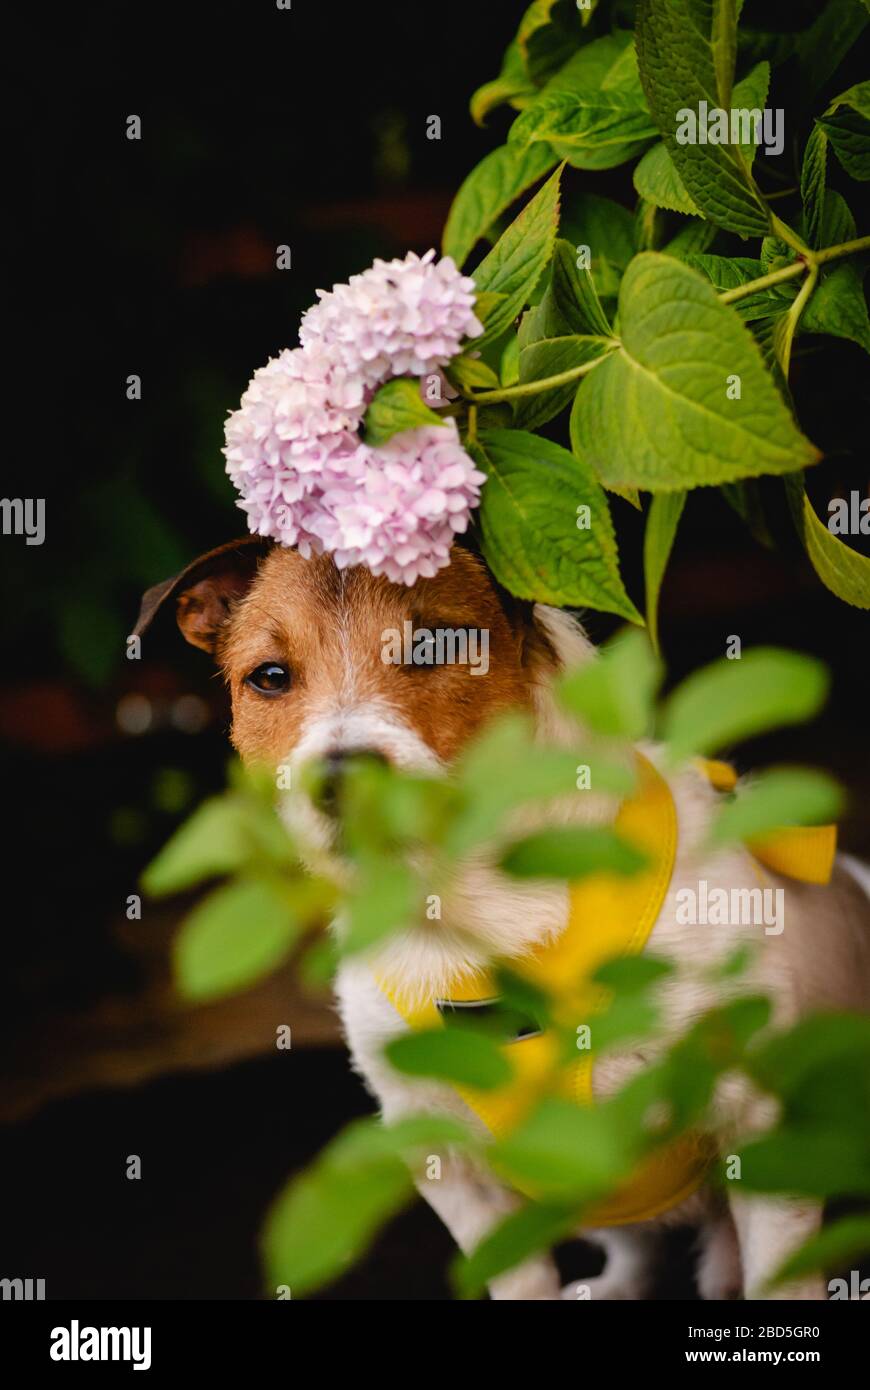 Dog playing hide-and-seek in garden hiding behind pink flowers Stock Photo